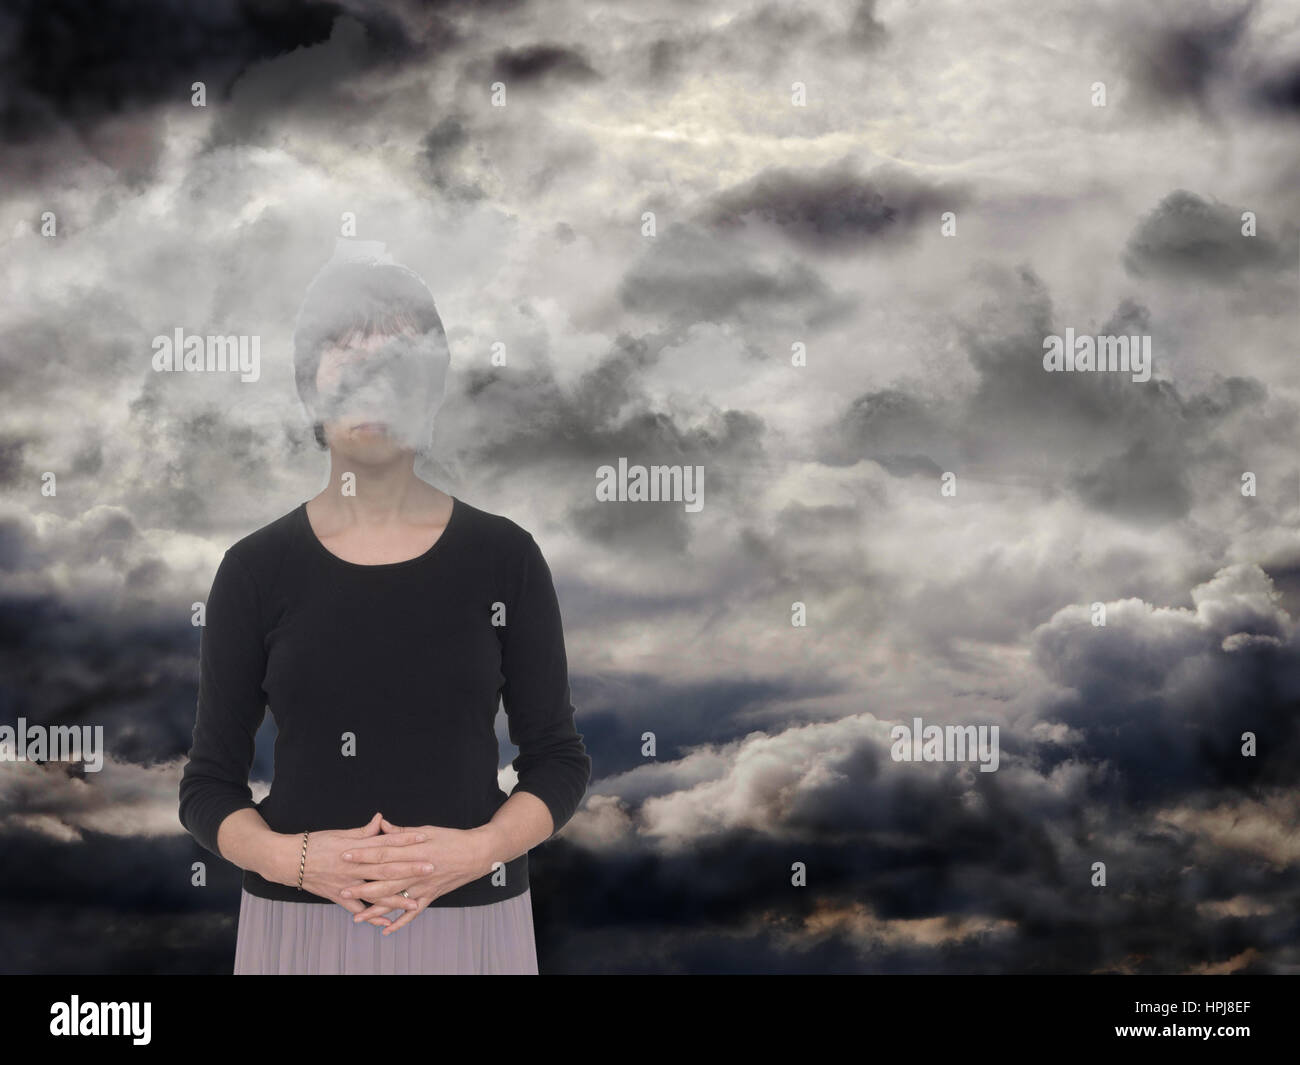 Woman in a dark space, grey clouds. Depression, anxiety concept, metaphor. Stock Photo